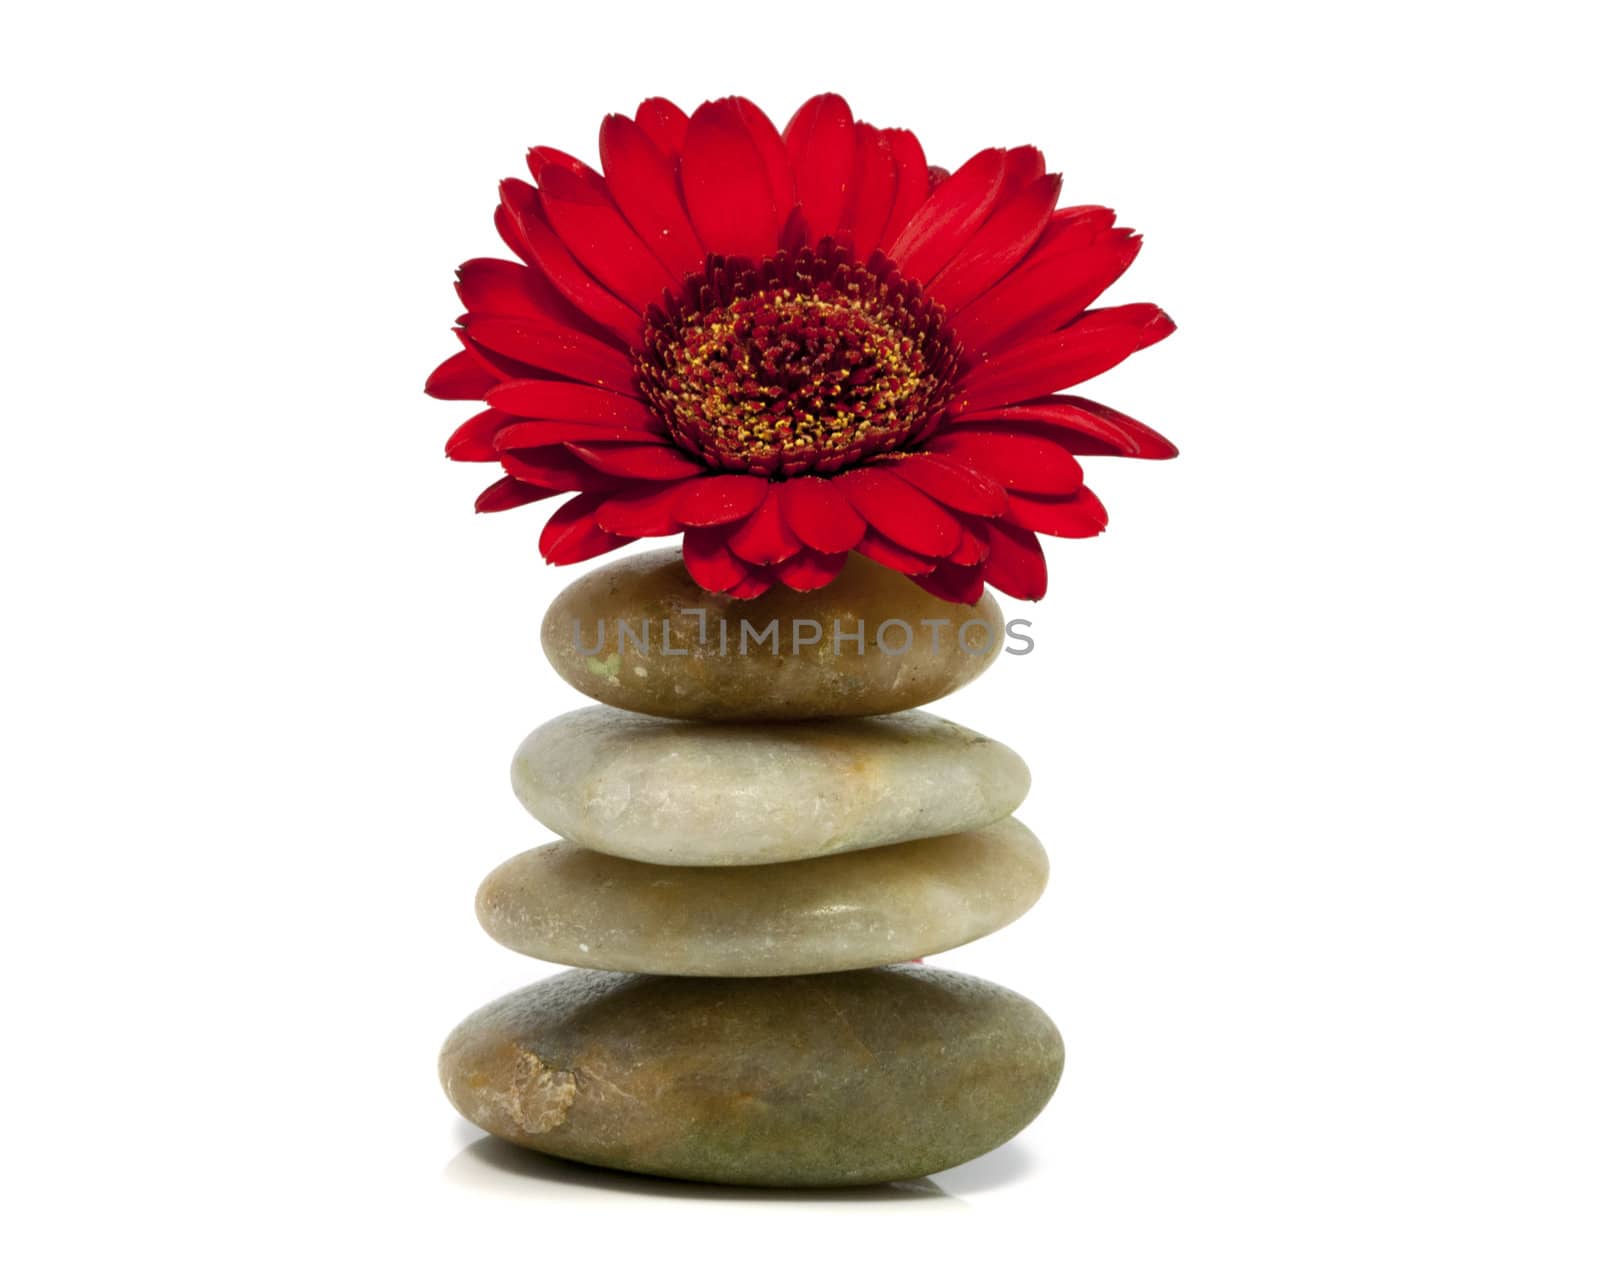 rocks with red flower isolated on white